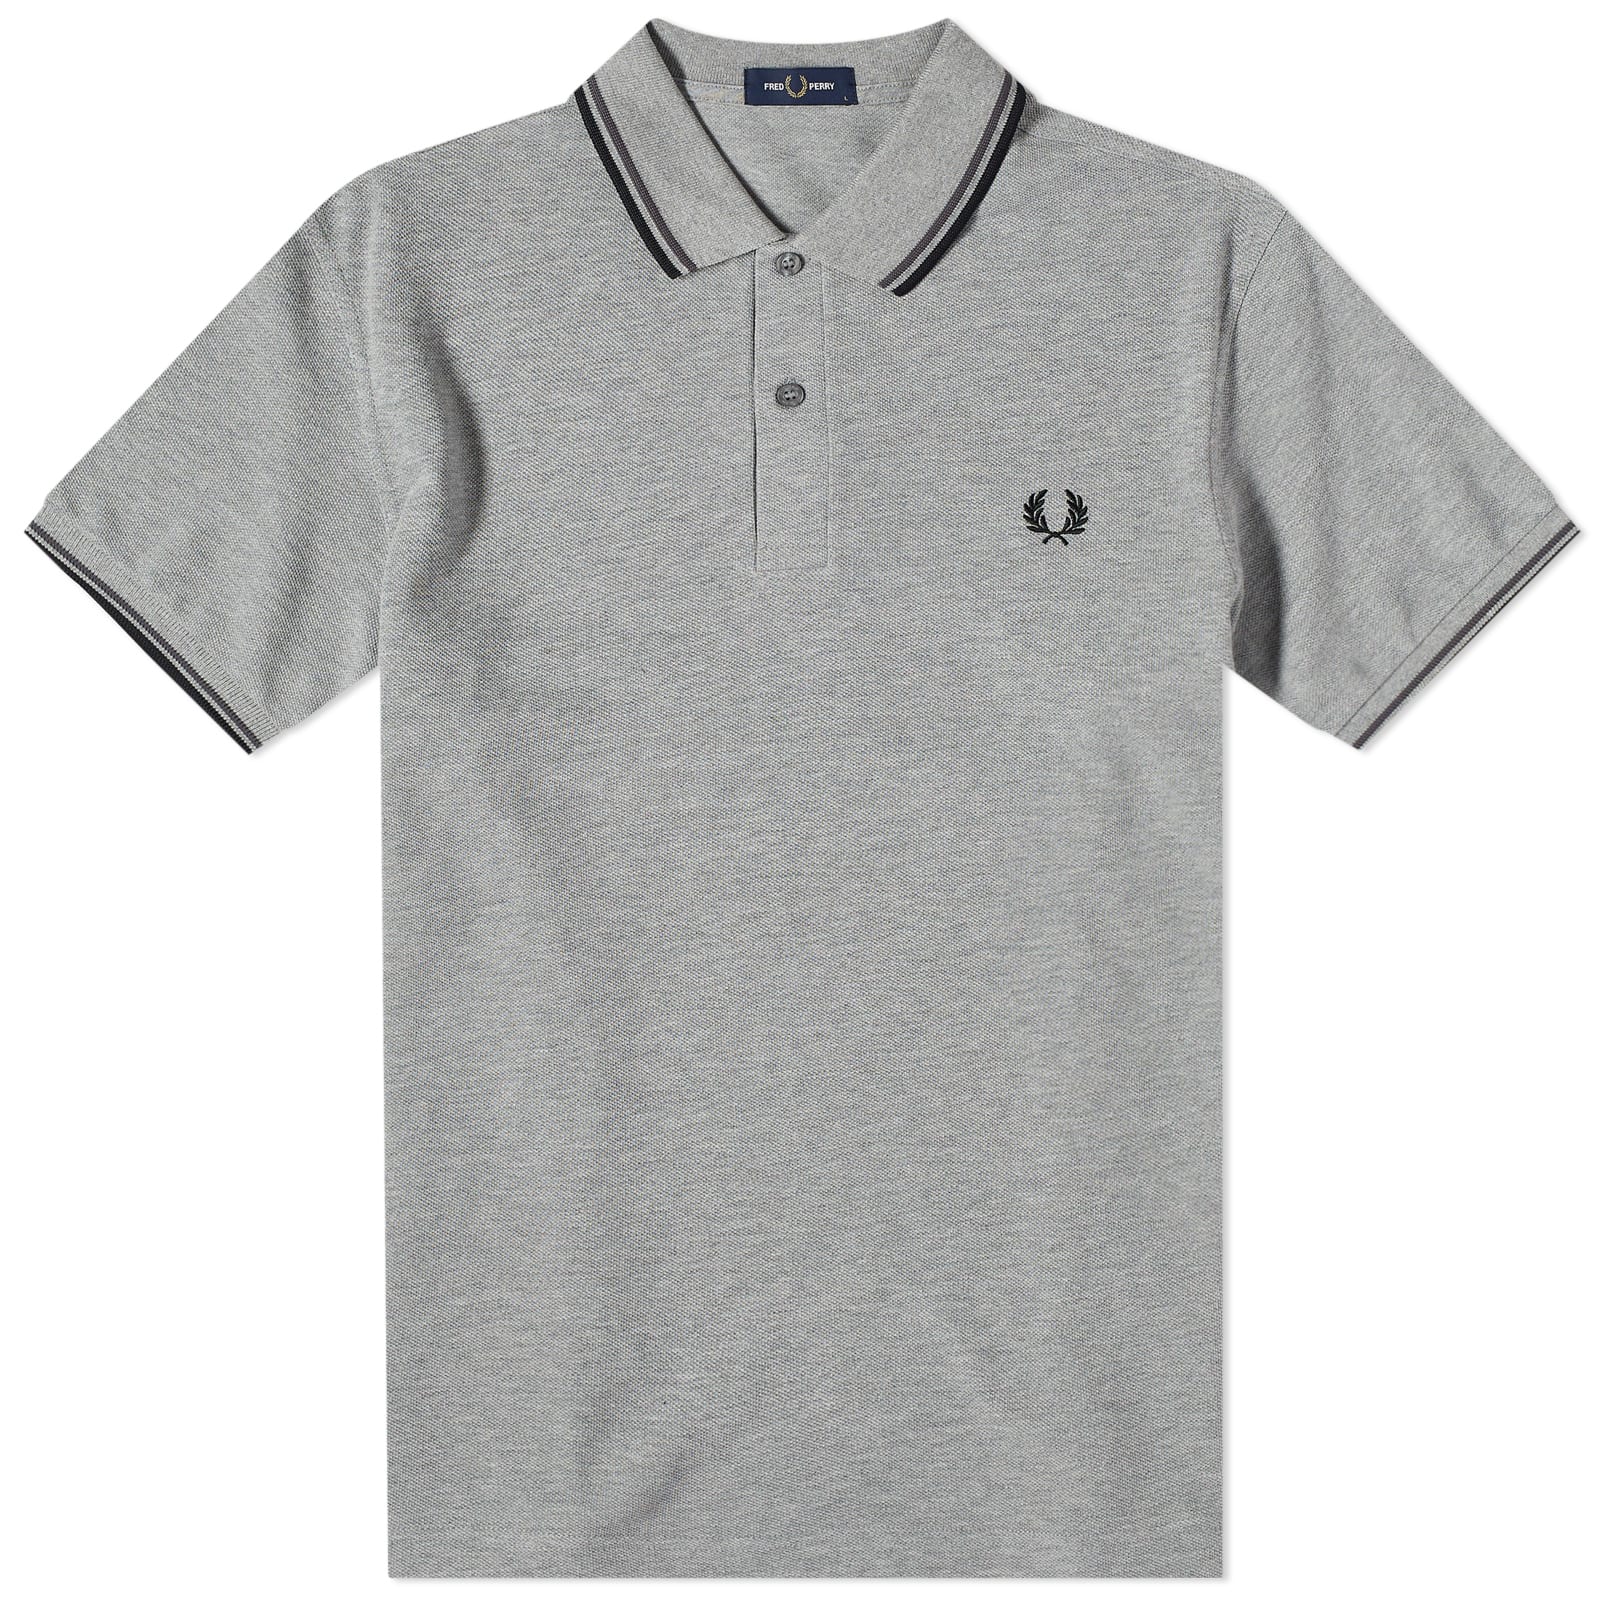 Футболка-поло Fred Perry Twin Tipped, светло-серый поло fred perry fred perry fr006emzzx97